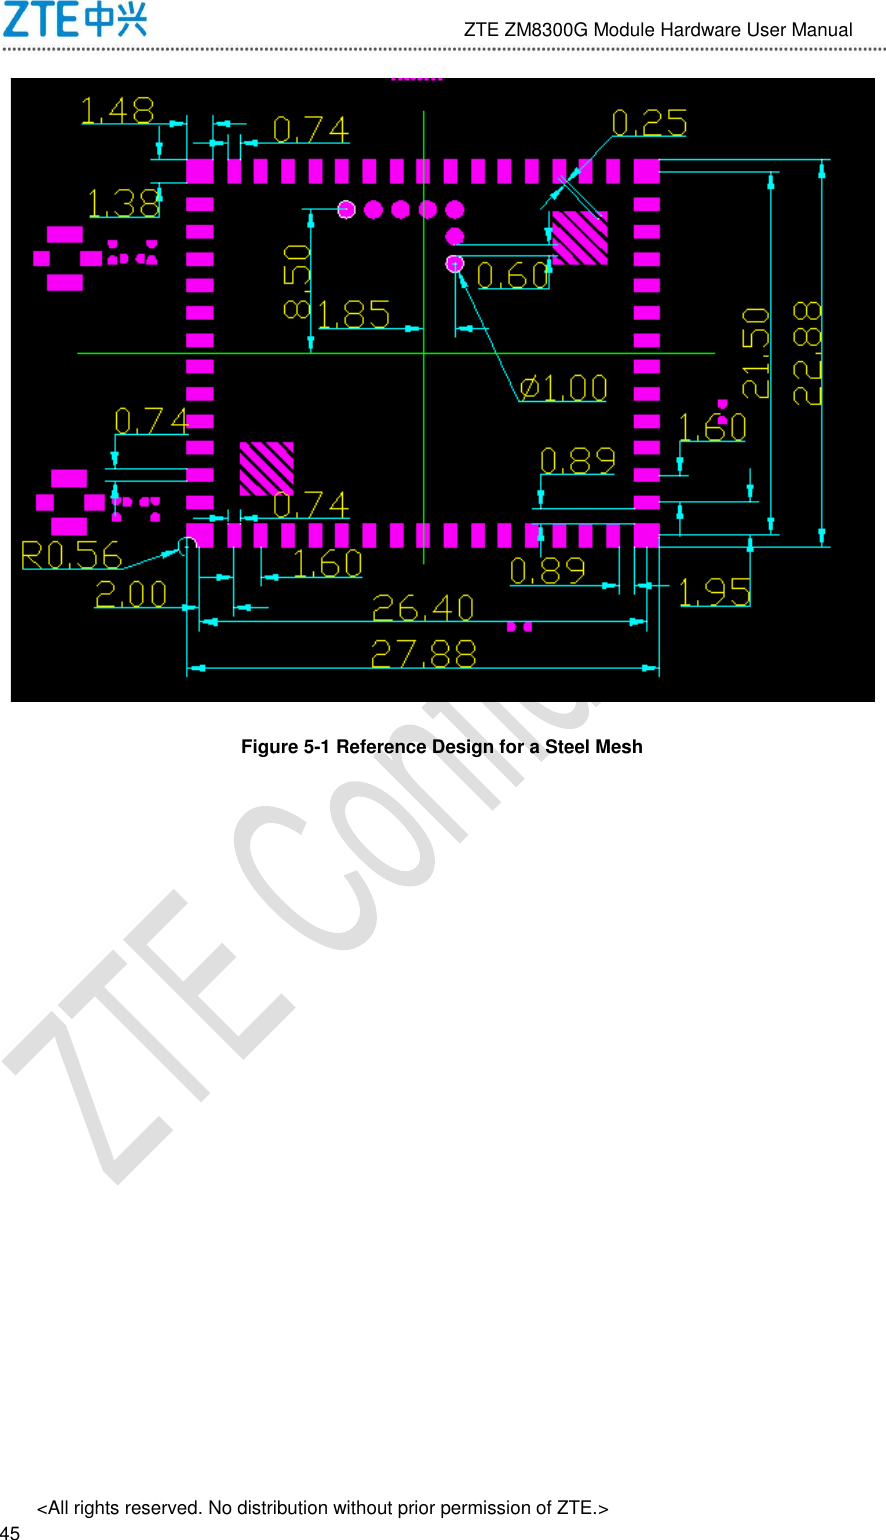                              ZTE ZM8300G Module Hardware User Manual &lt;All rights reserved. No distribution without prior permission of ZTE.&gt;                                                               45  Figure 5-1 Reference Design for a Steel Mesh 